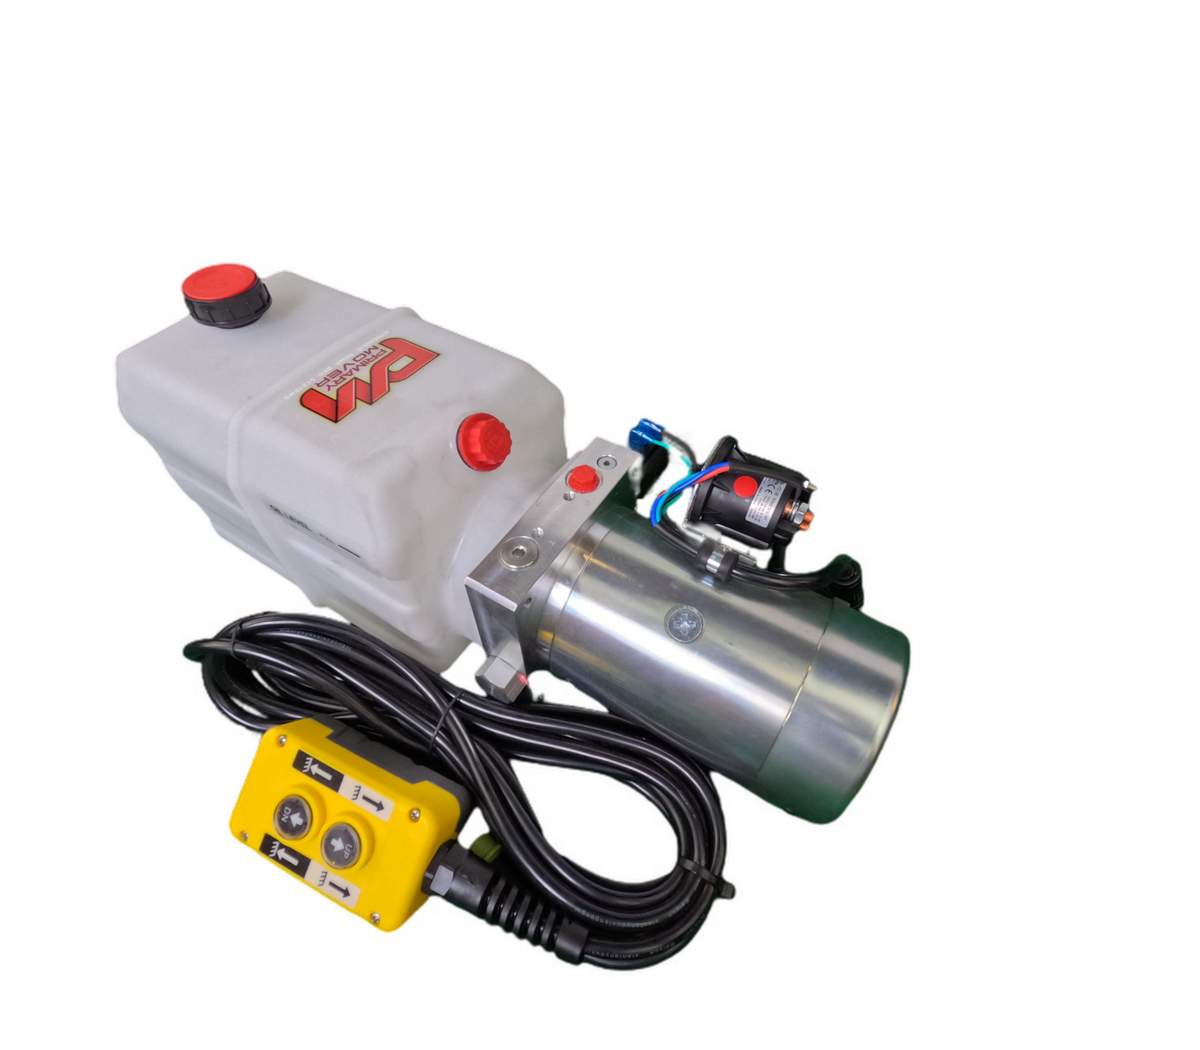 DLH 12V Single-Acting Hydraulic Pump - Poly Reservoir: A machine with a red cap, white container, yellow switch, and black wires, ideal for hydraulic dump bed trailers and trucks.